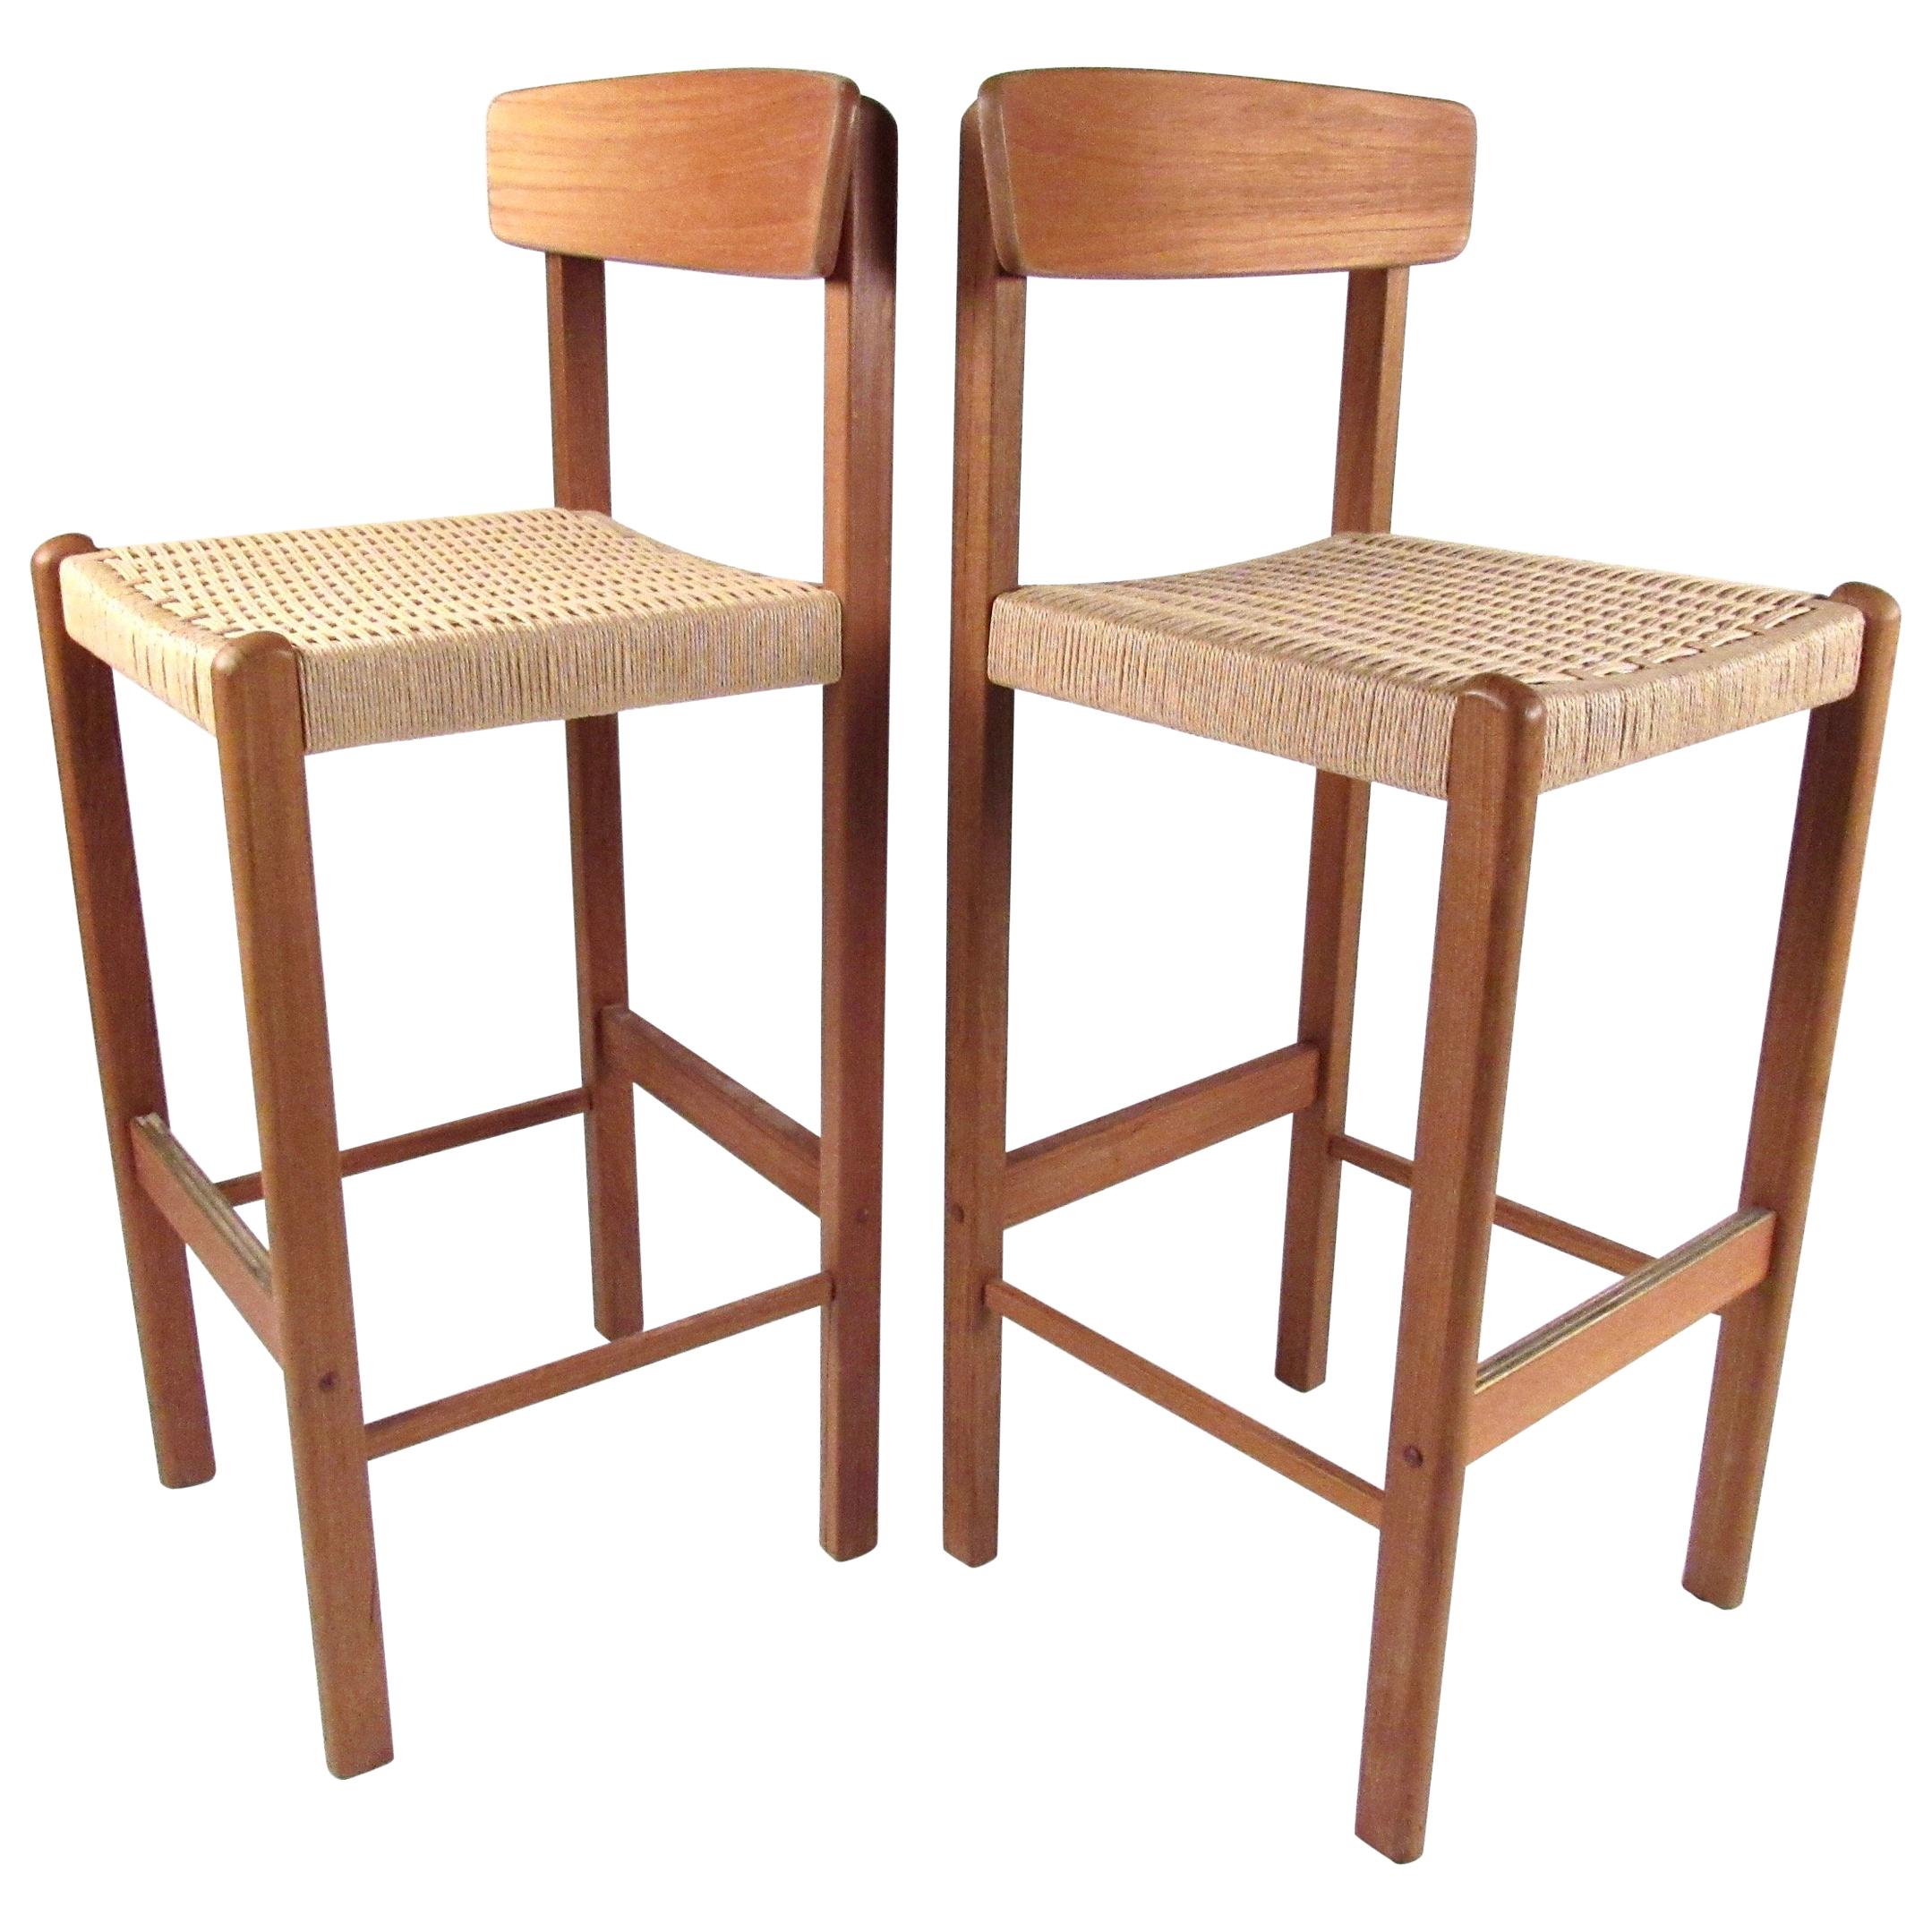 Pair of Modern Teak and Paper Cord Bar Stools